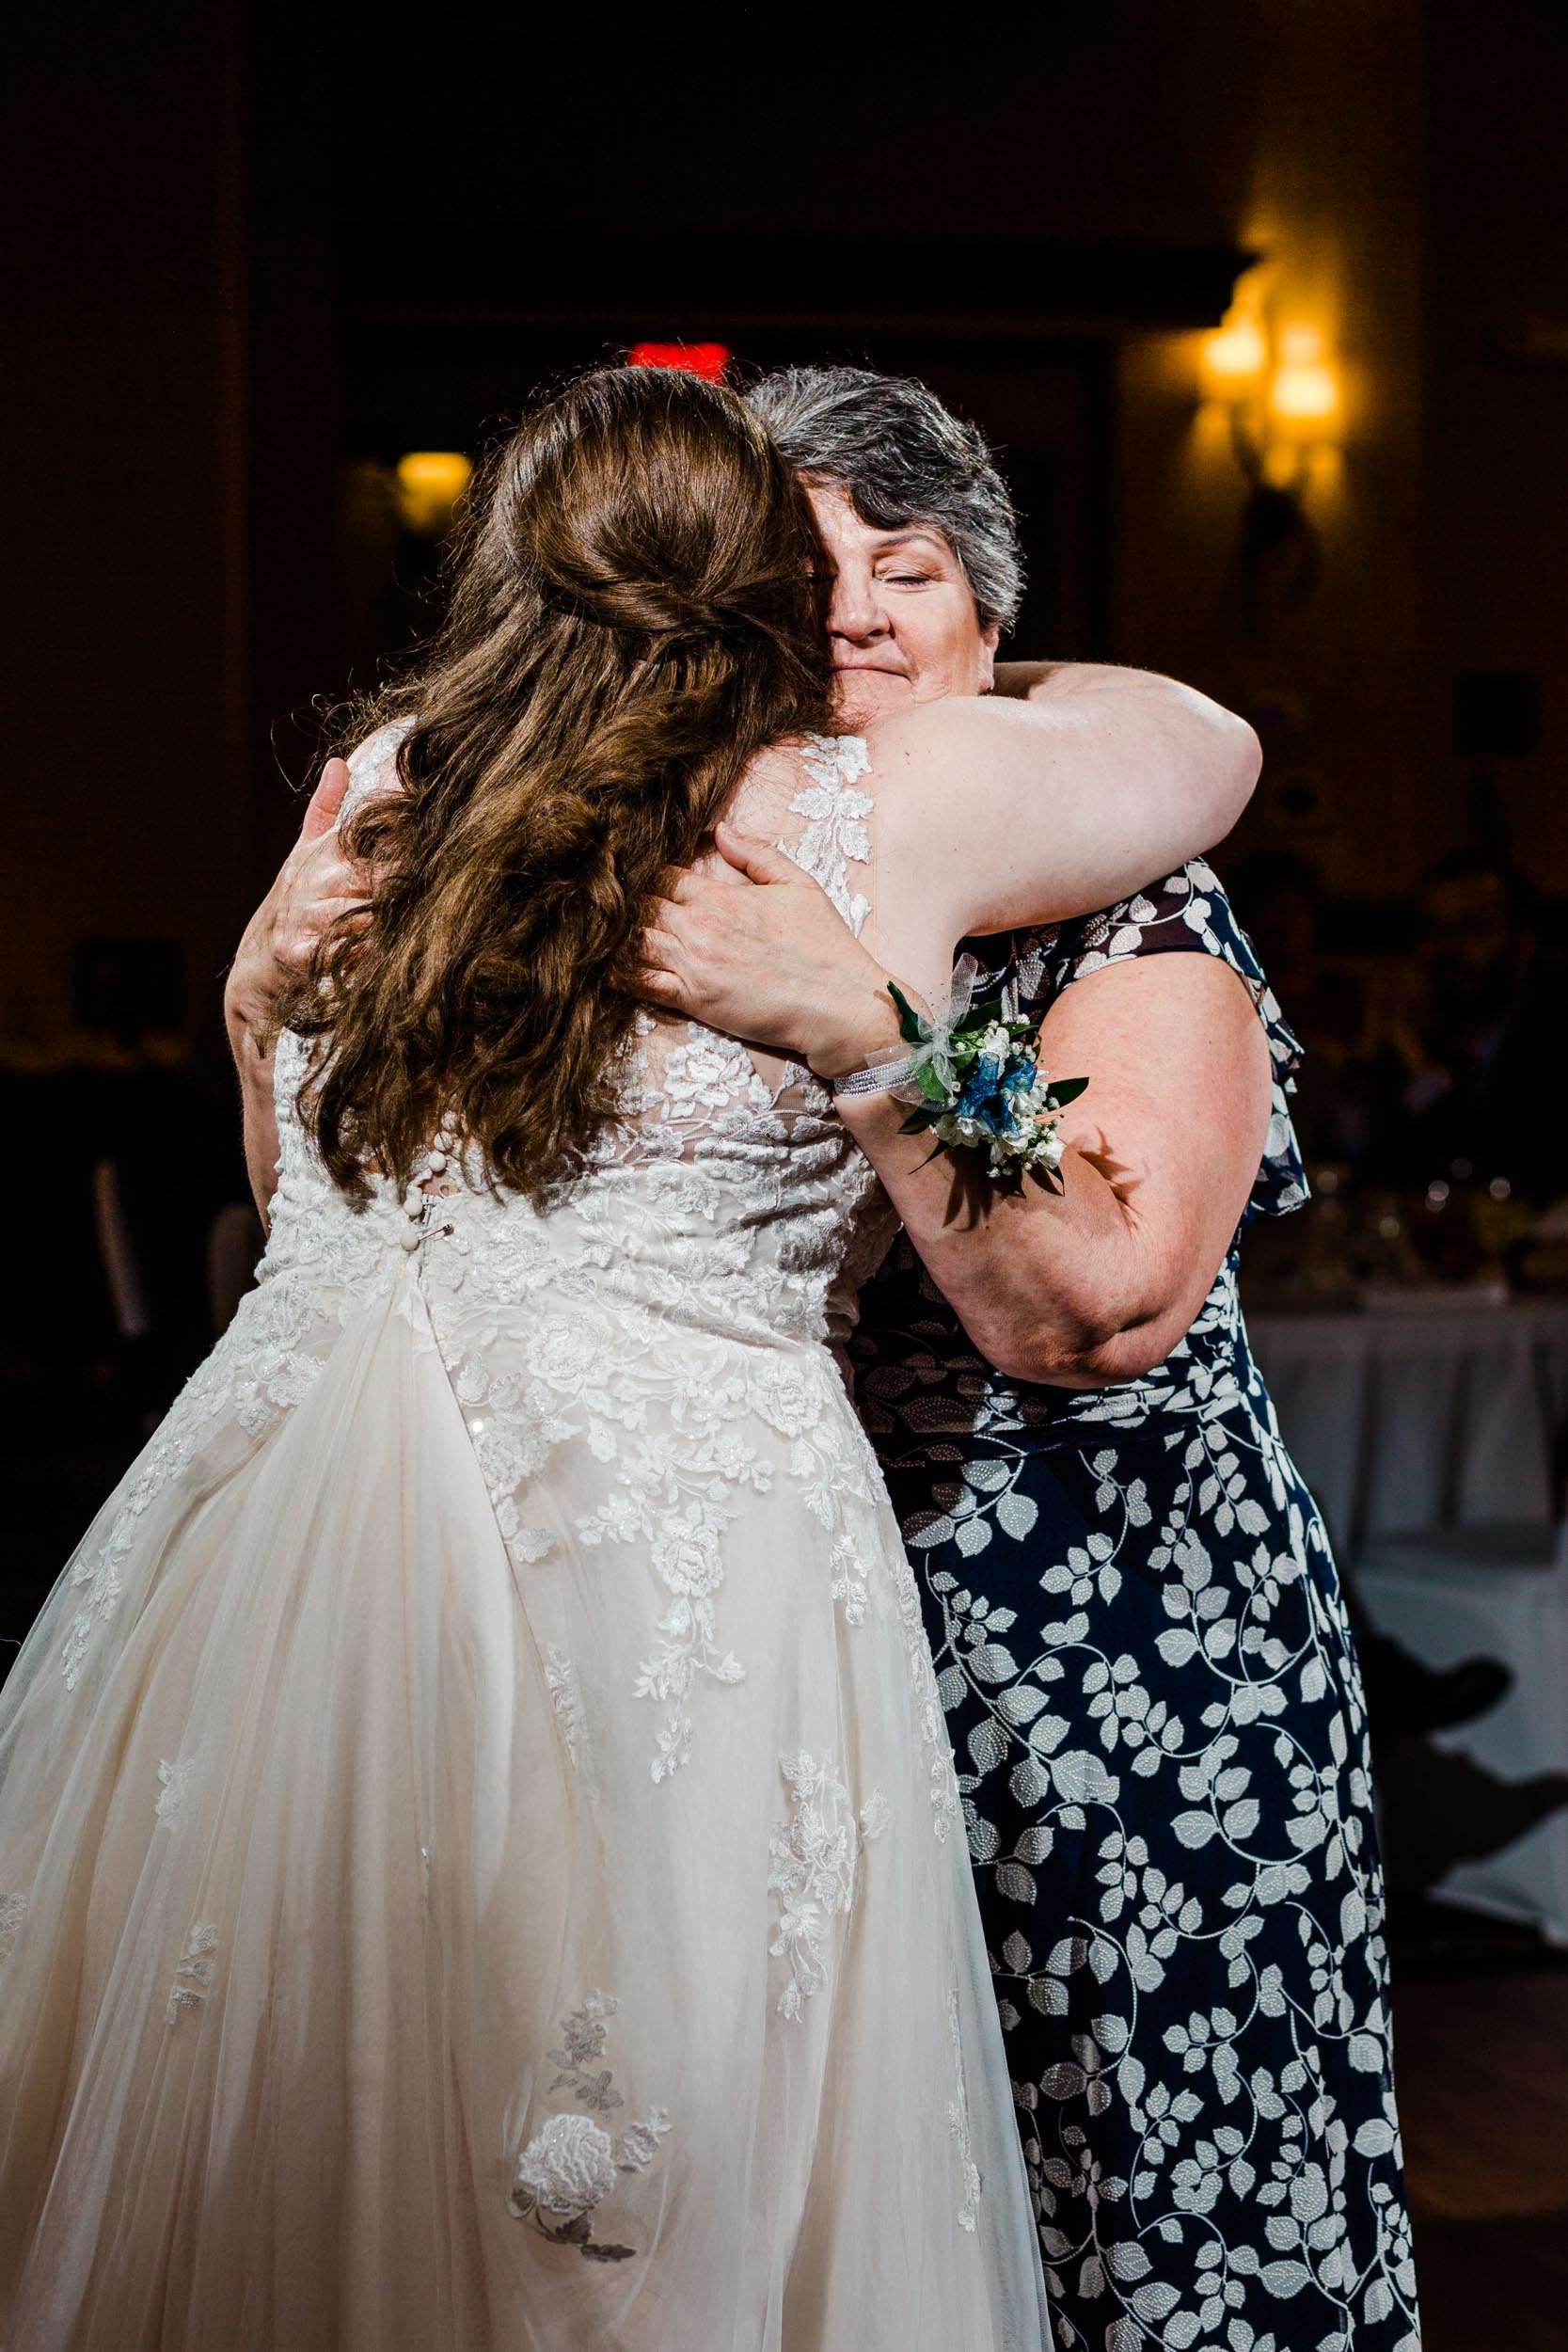 Mother daughter dance at wedding